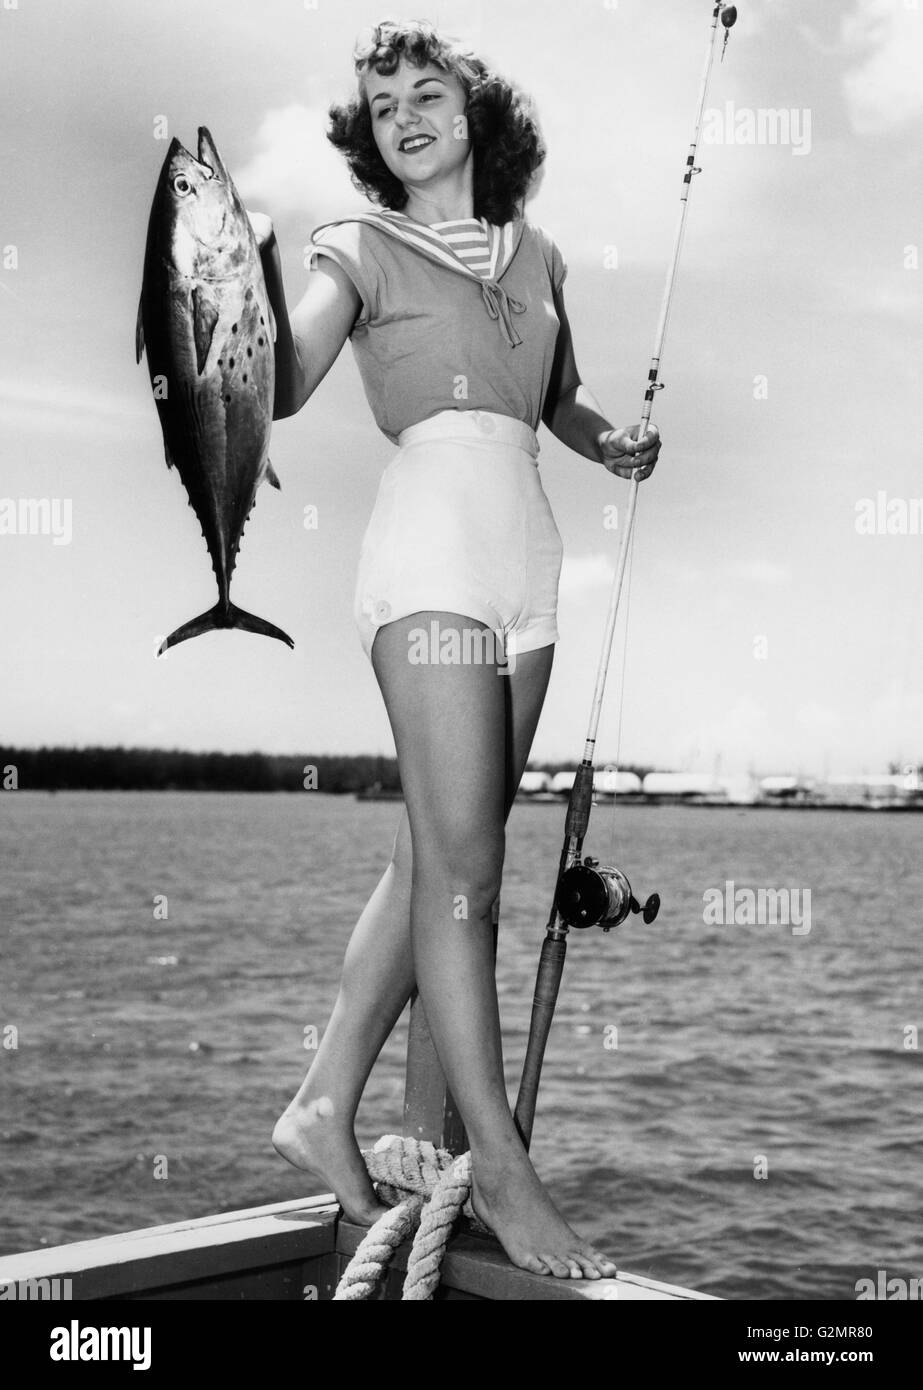 florida,miami beach,the winner of the fishing competition,1956 Stock Photo